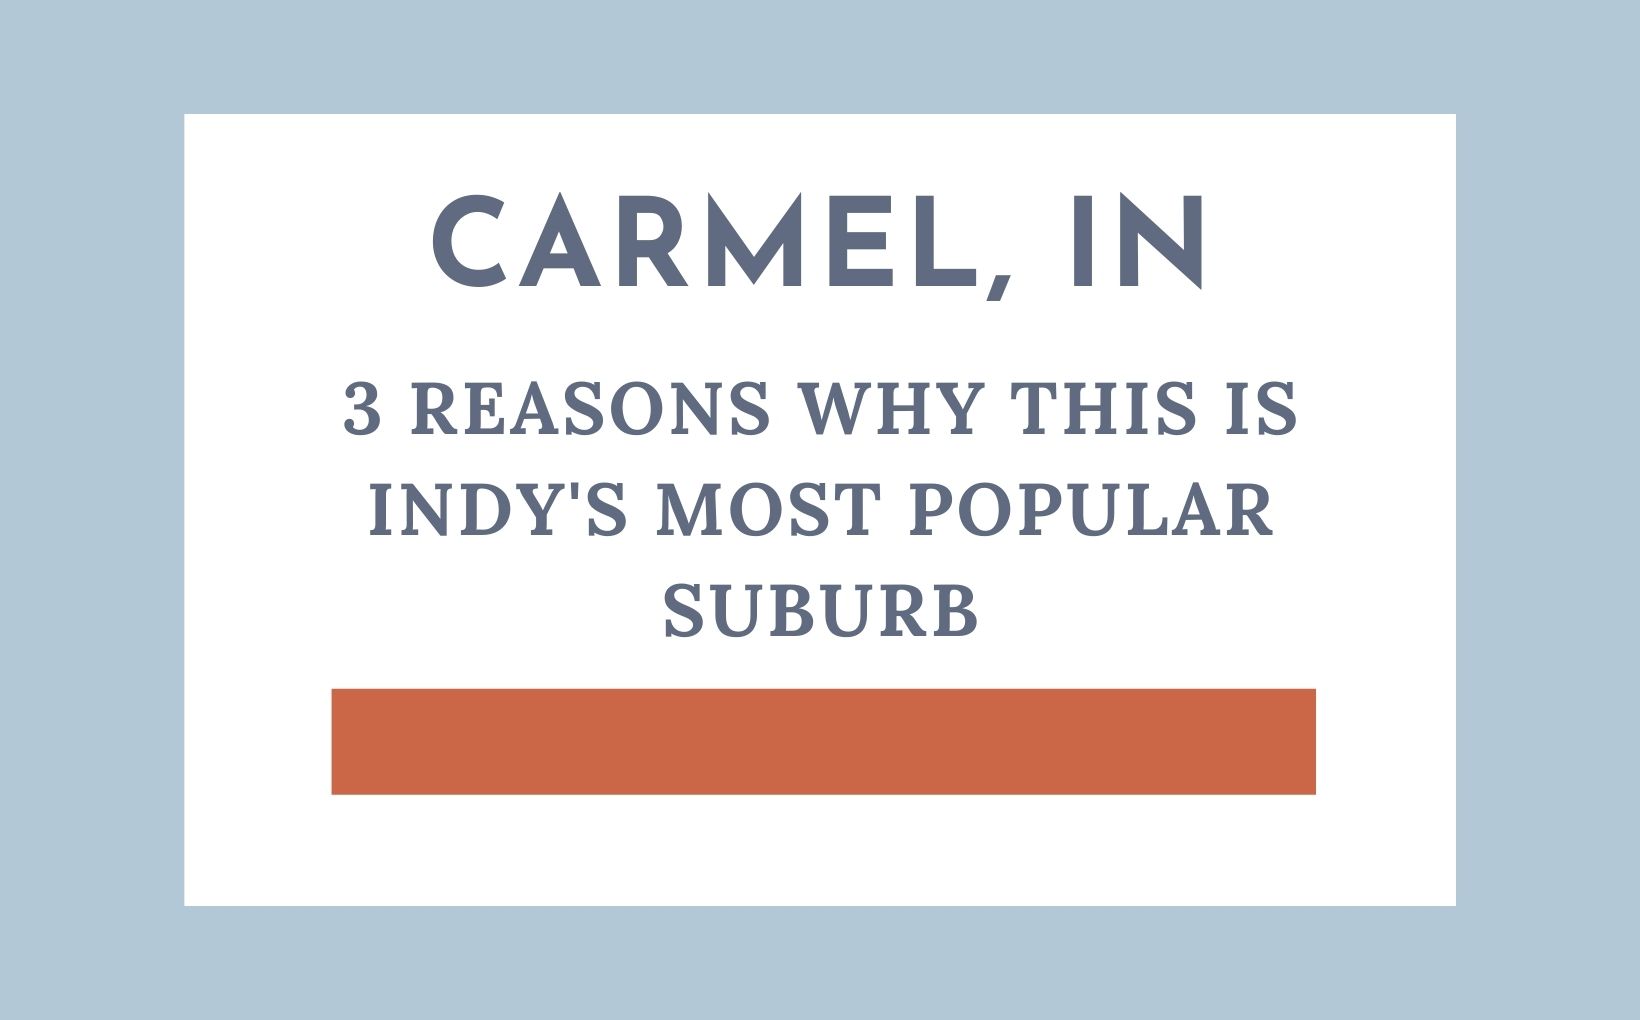 3 reasons why Carmel Indiana is Indianapolis's most popular suburb feature image